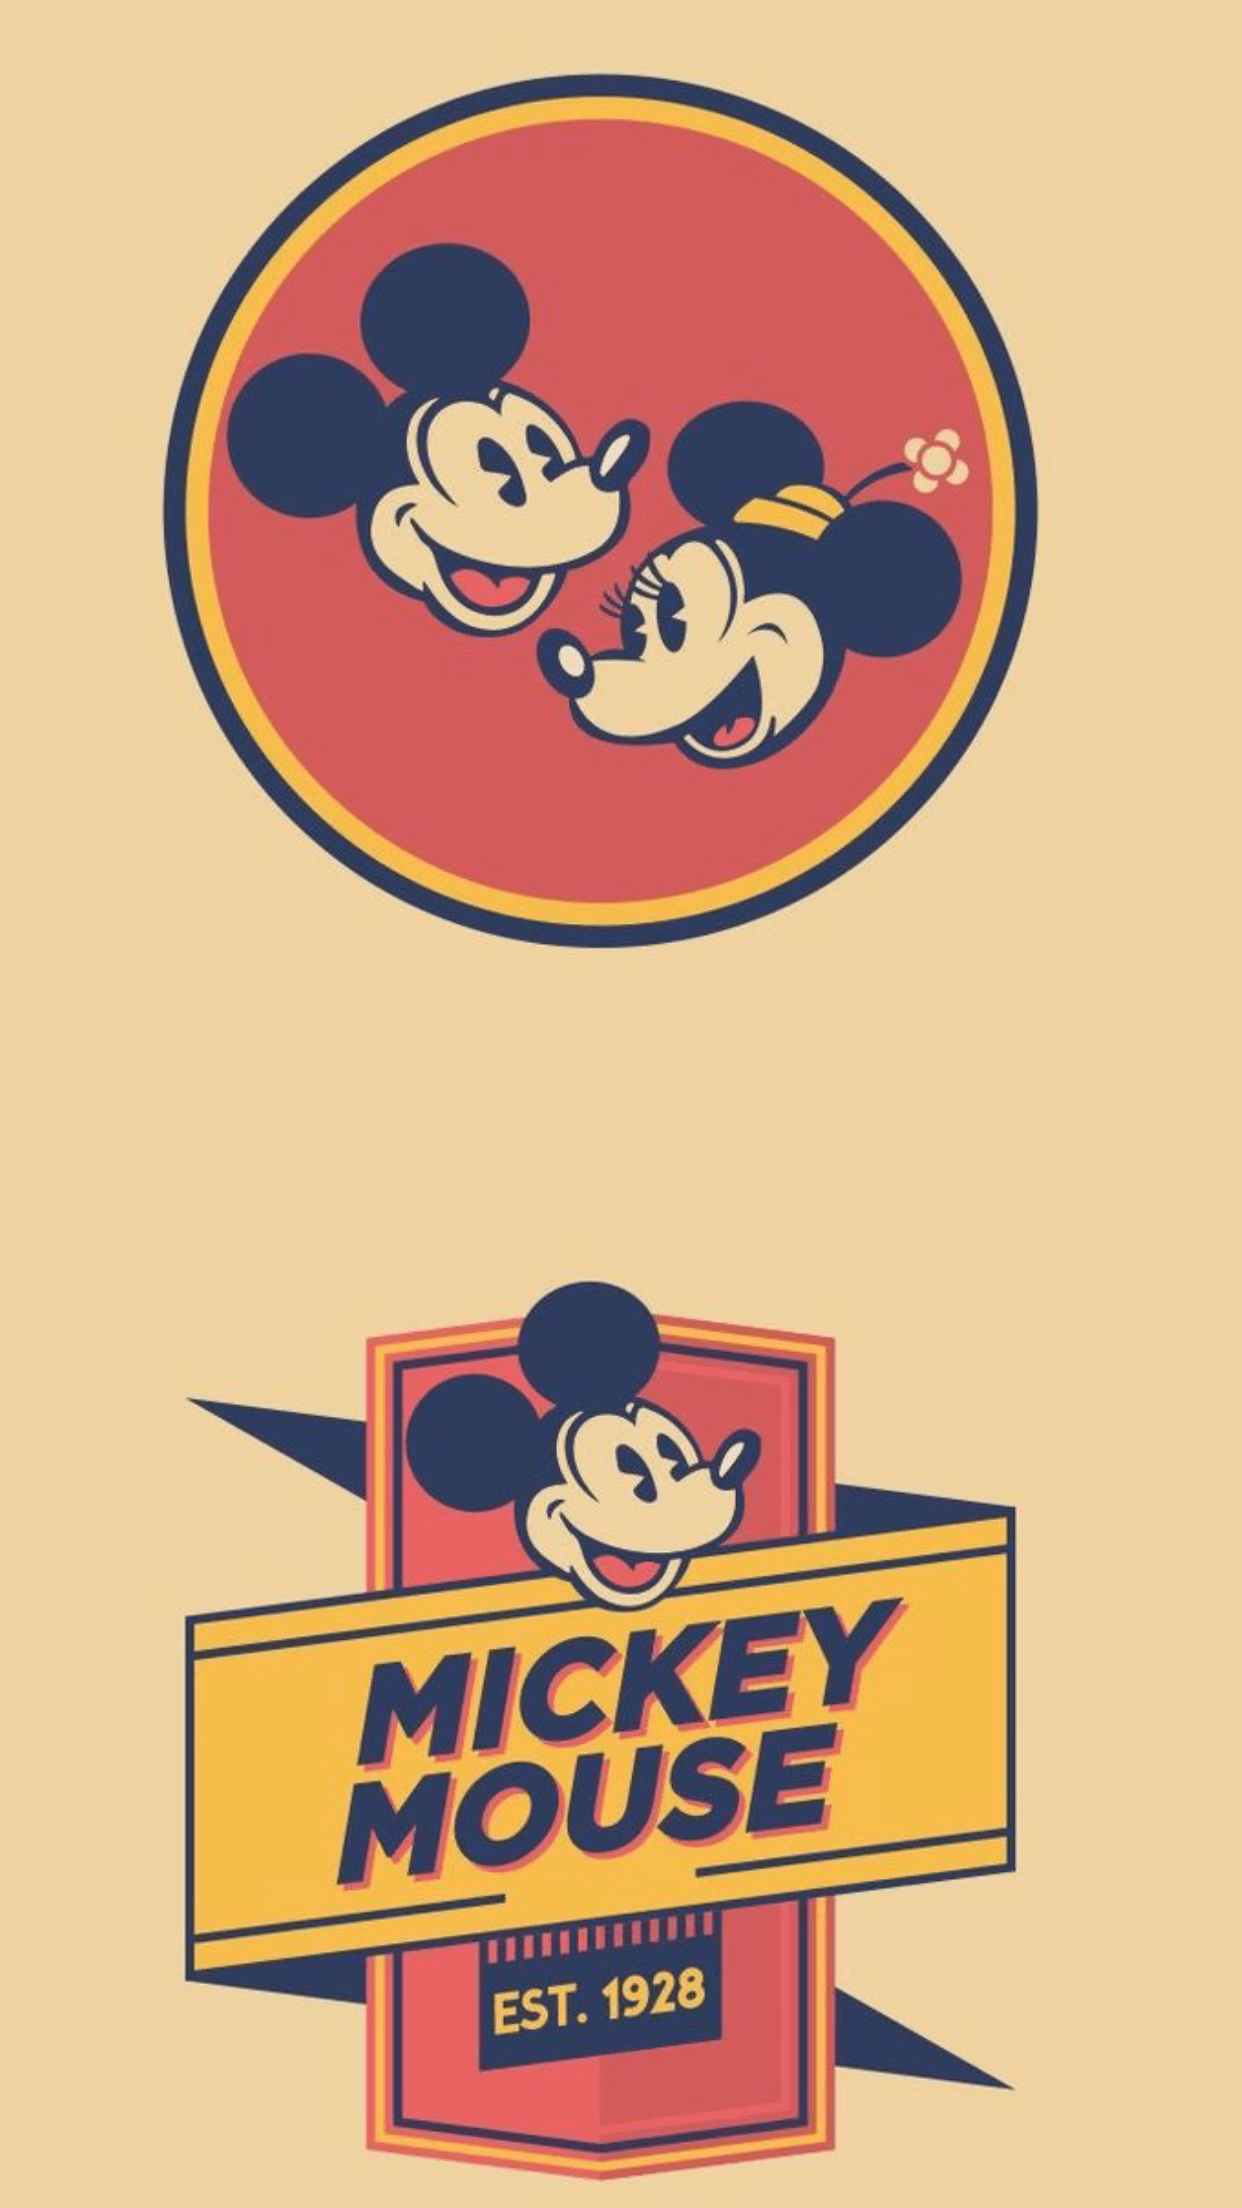 A couple of mickey mouse logos on the wall - Mickey Mouse, Minnie Mouse